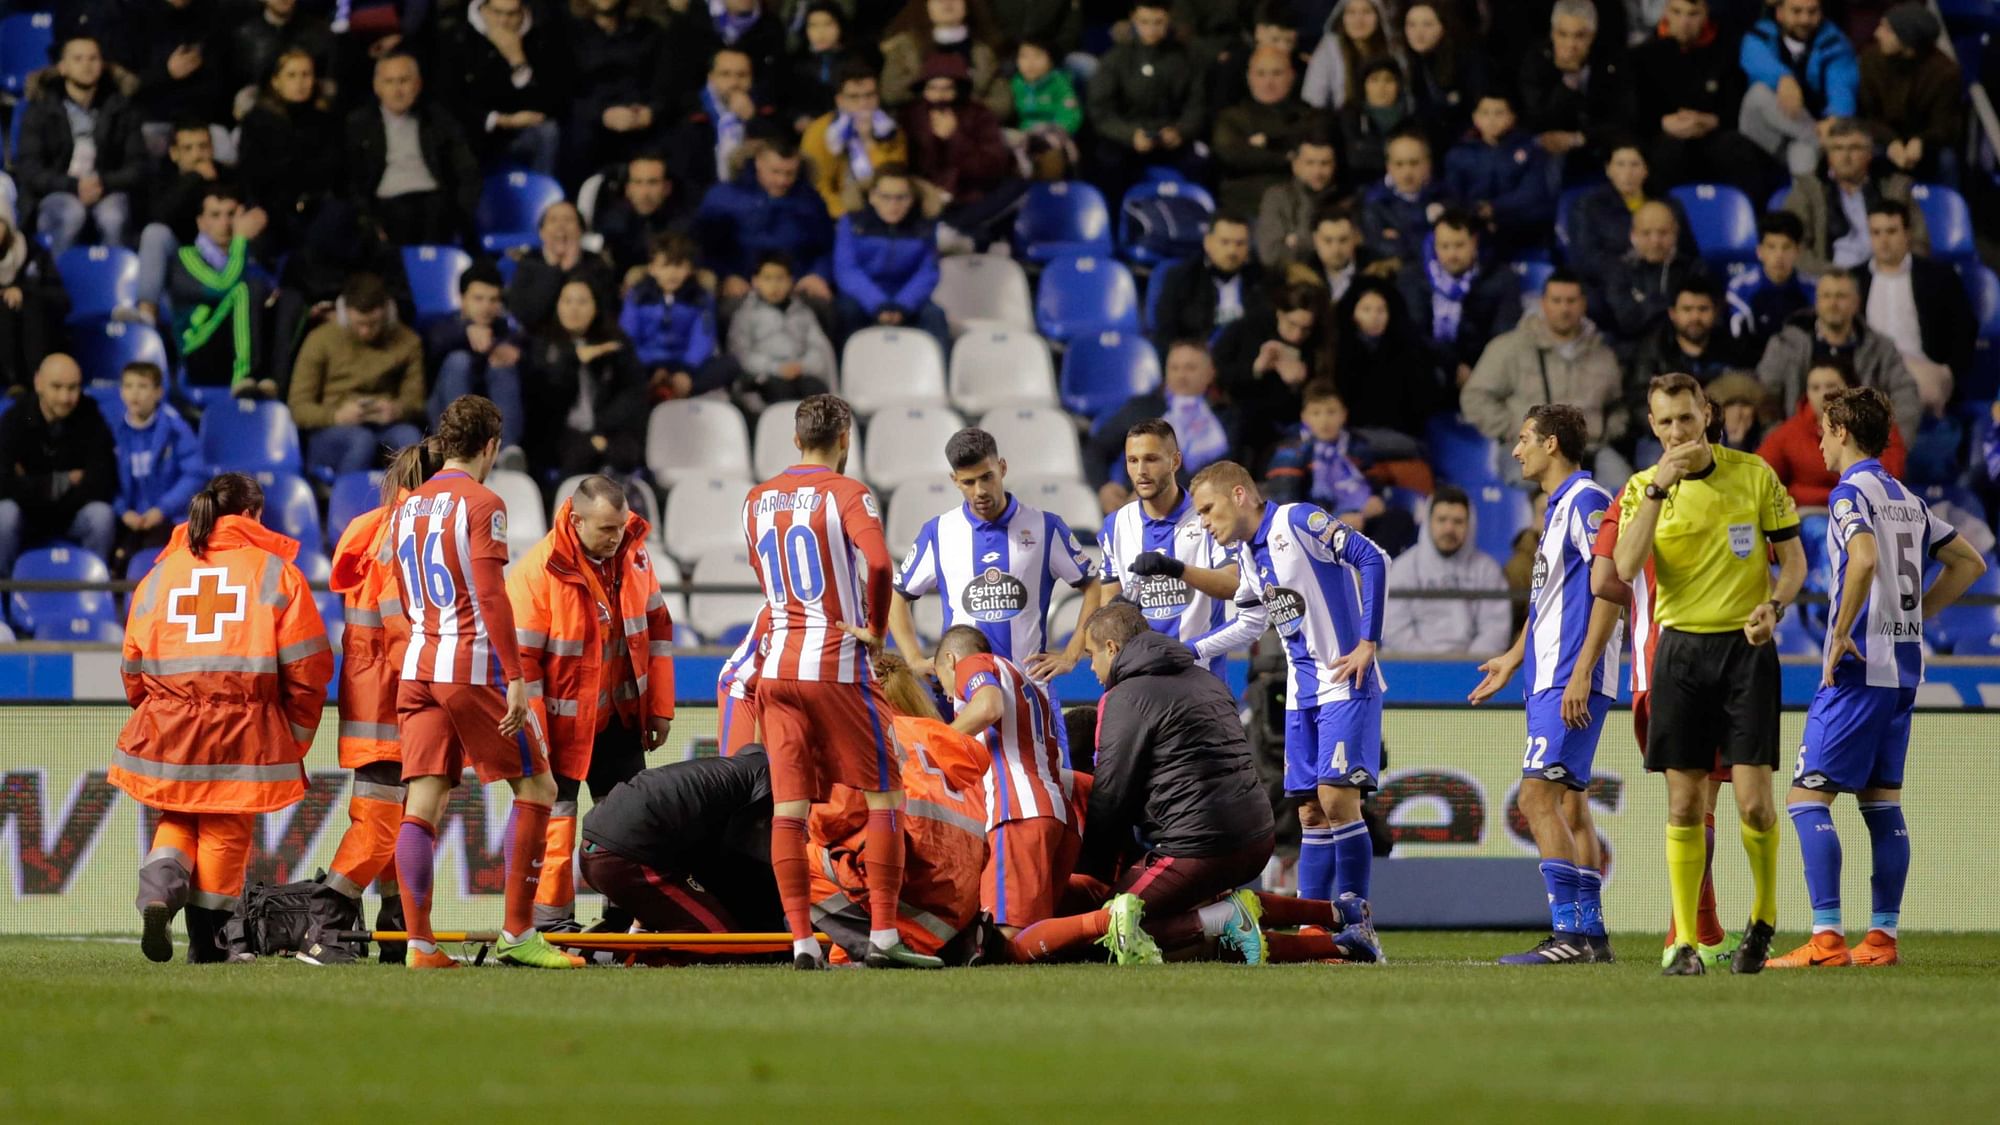 Paramedics and players  gather around Atletico Madrid’s Fernando Torres as he lies injured on the ground. (Photo: Reuters)